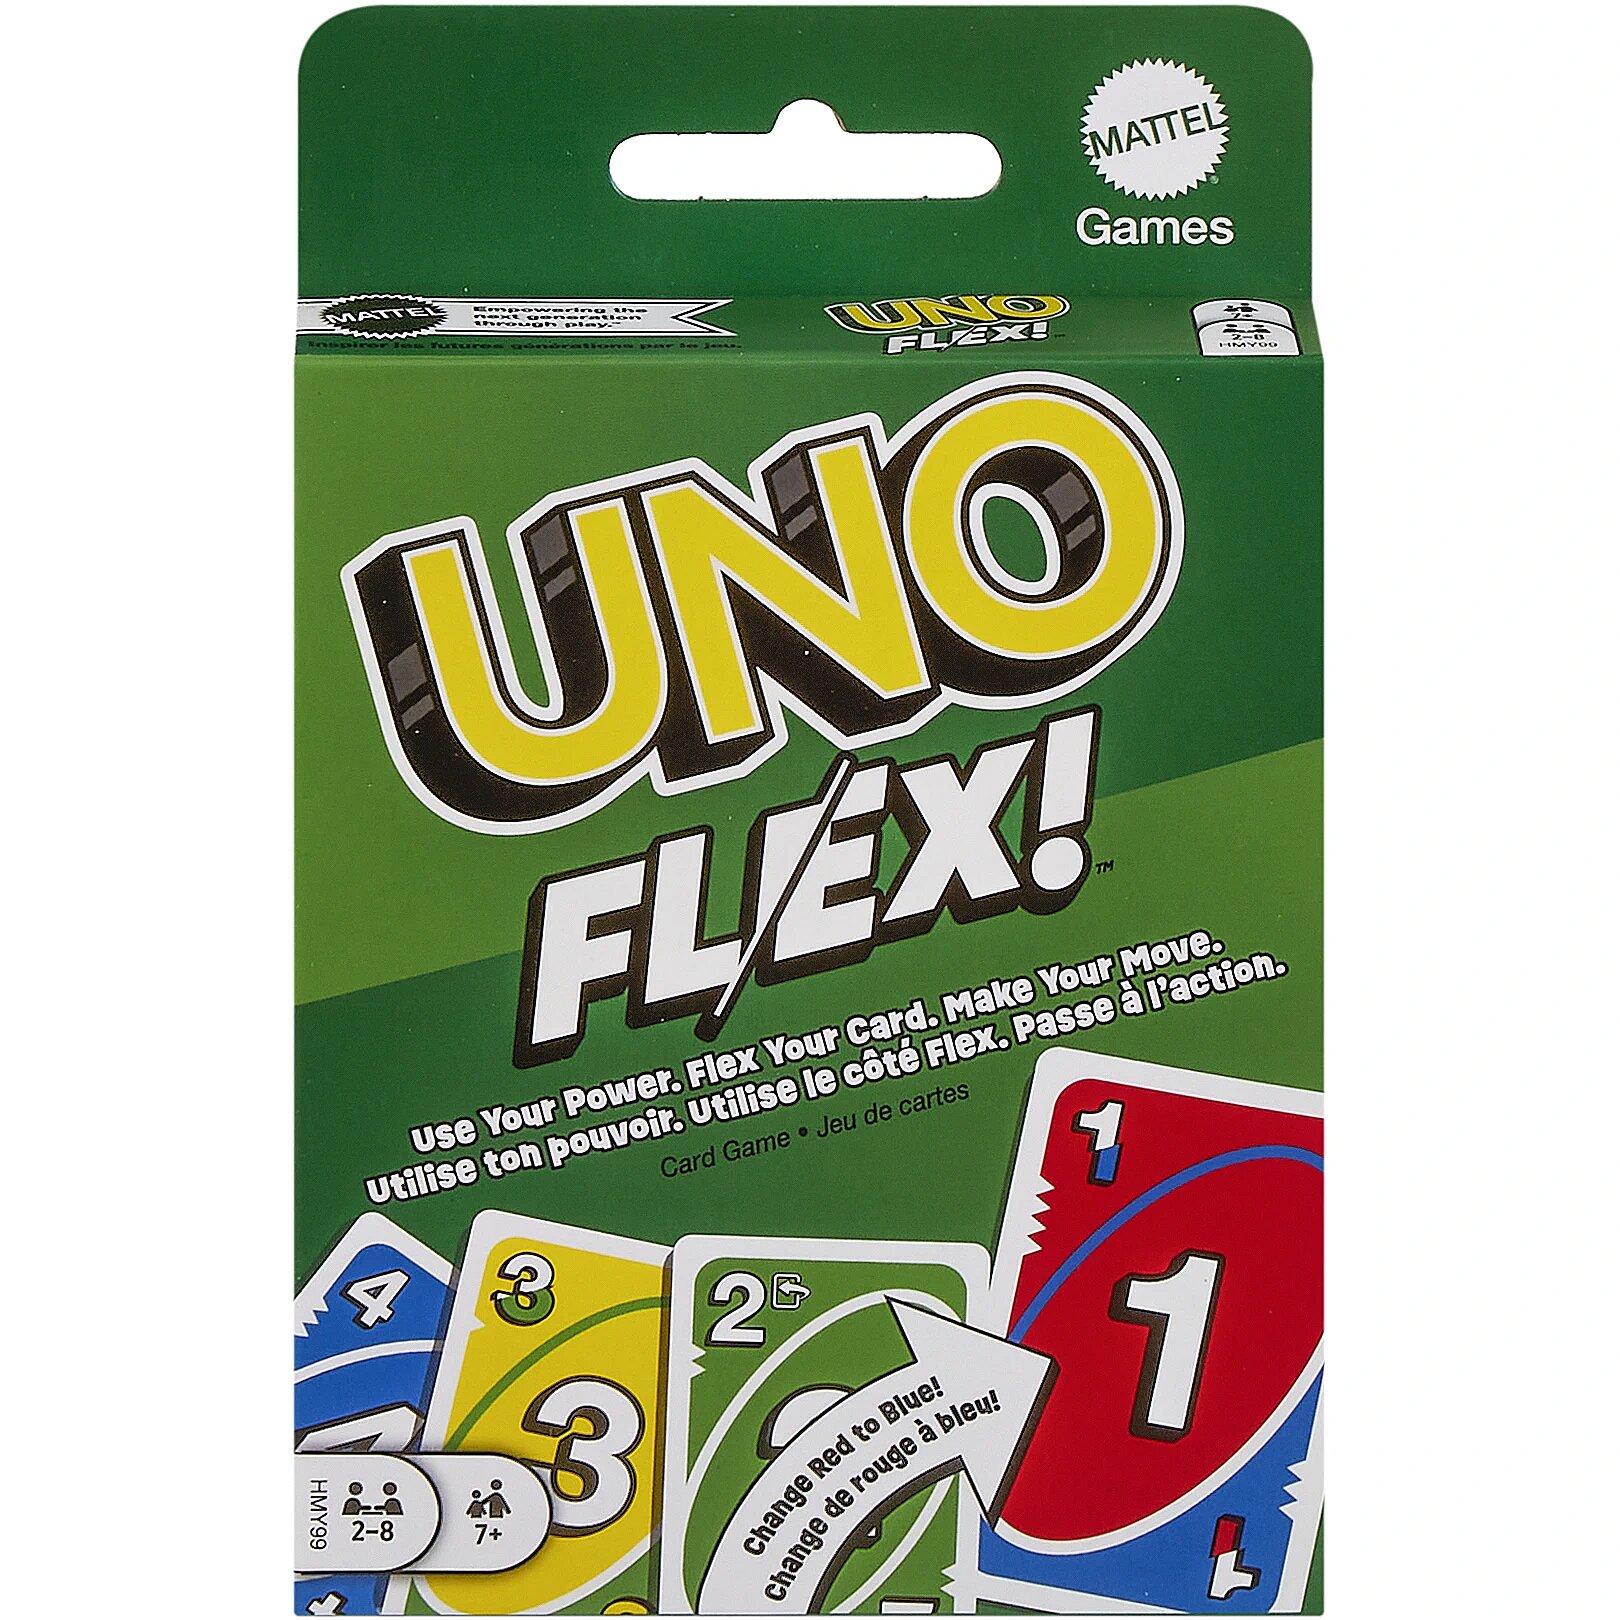 How to Play Uno Flex in 3 minutes (Uno Flex Rules in English